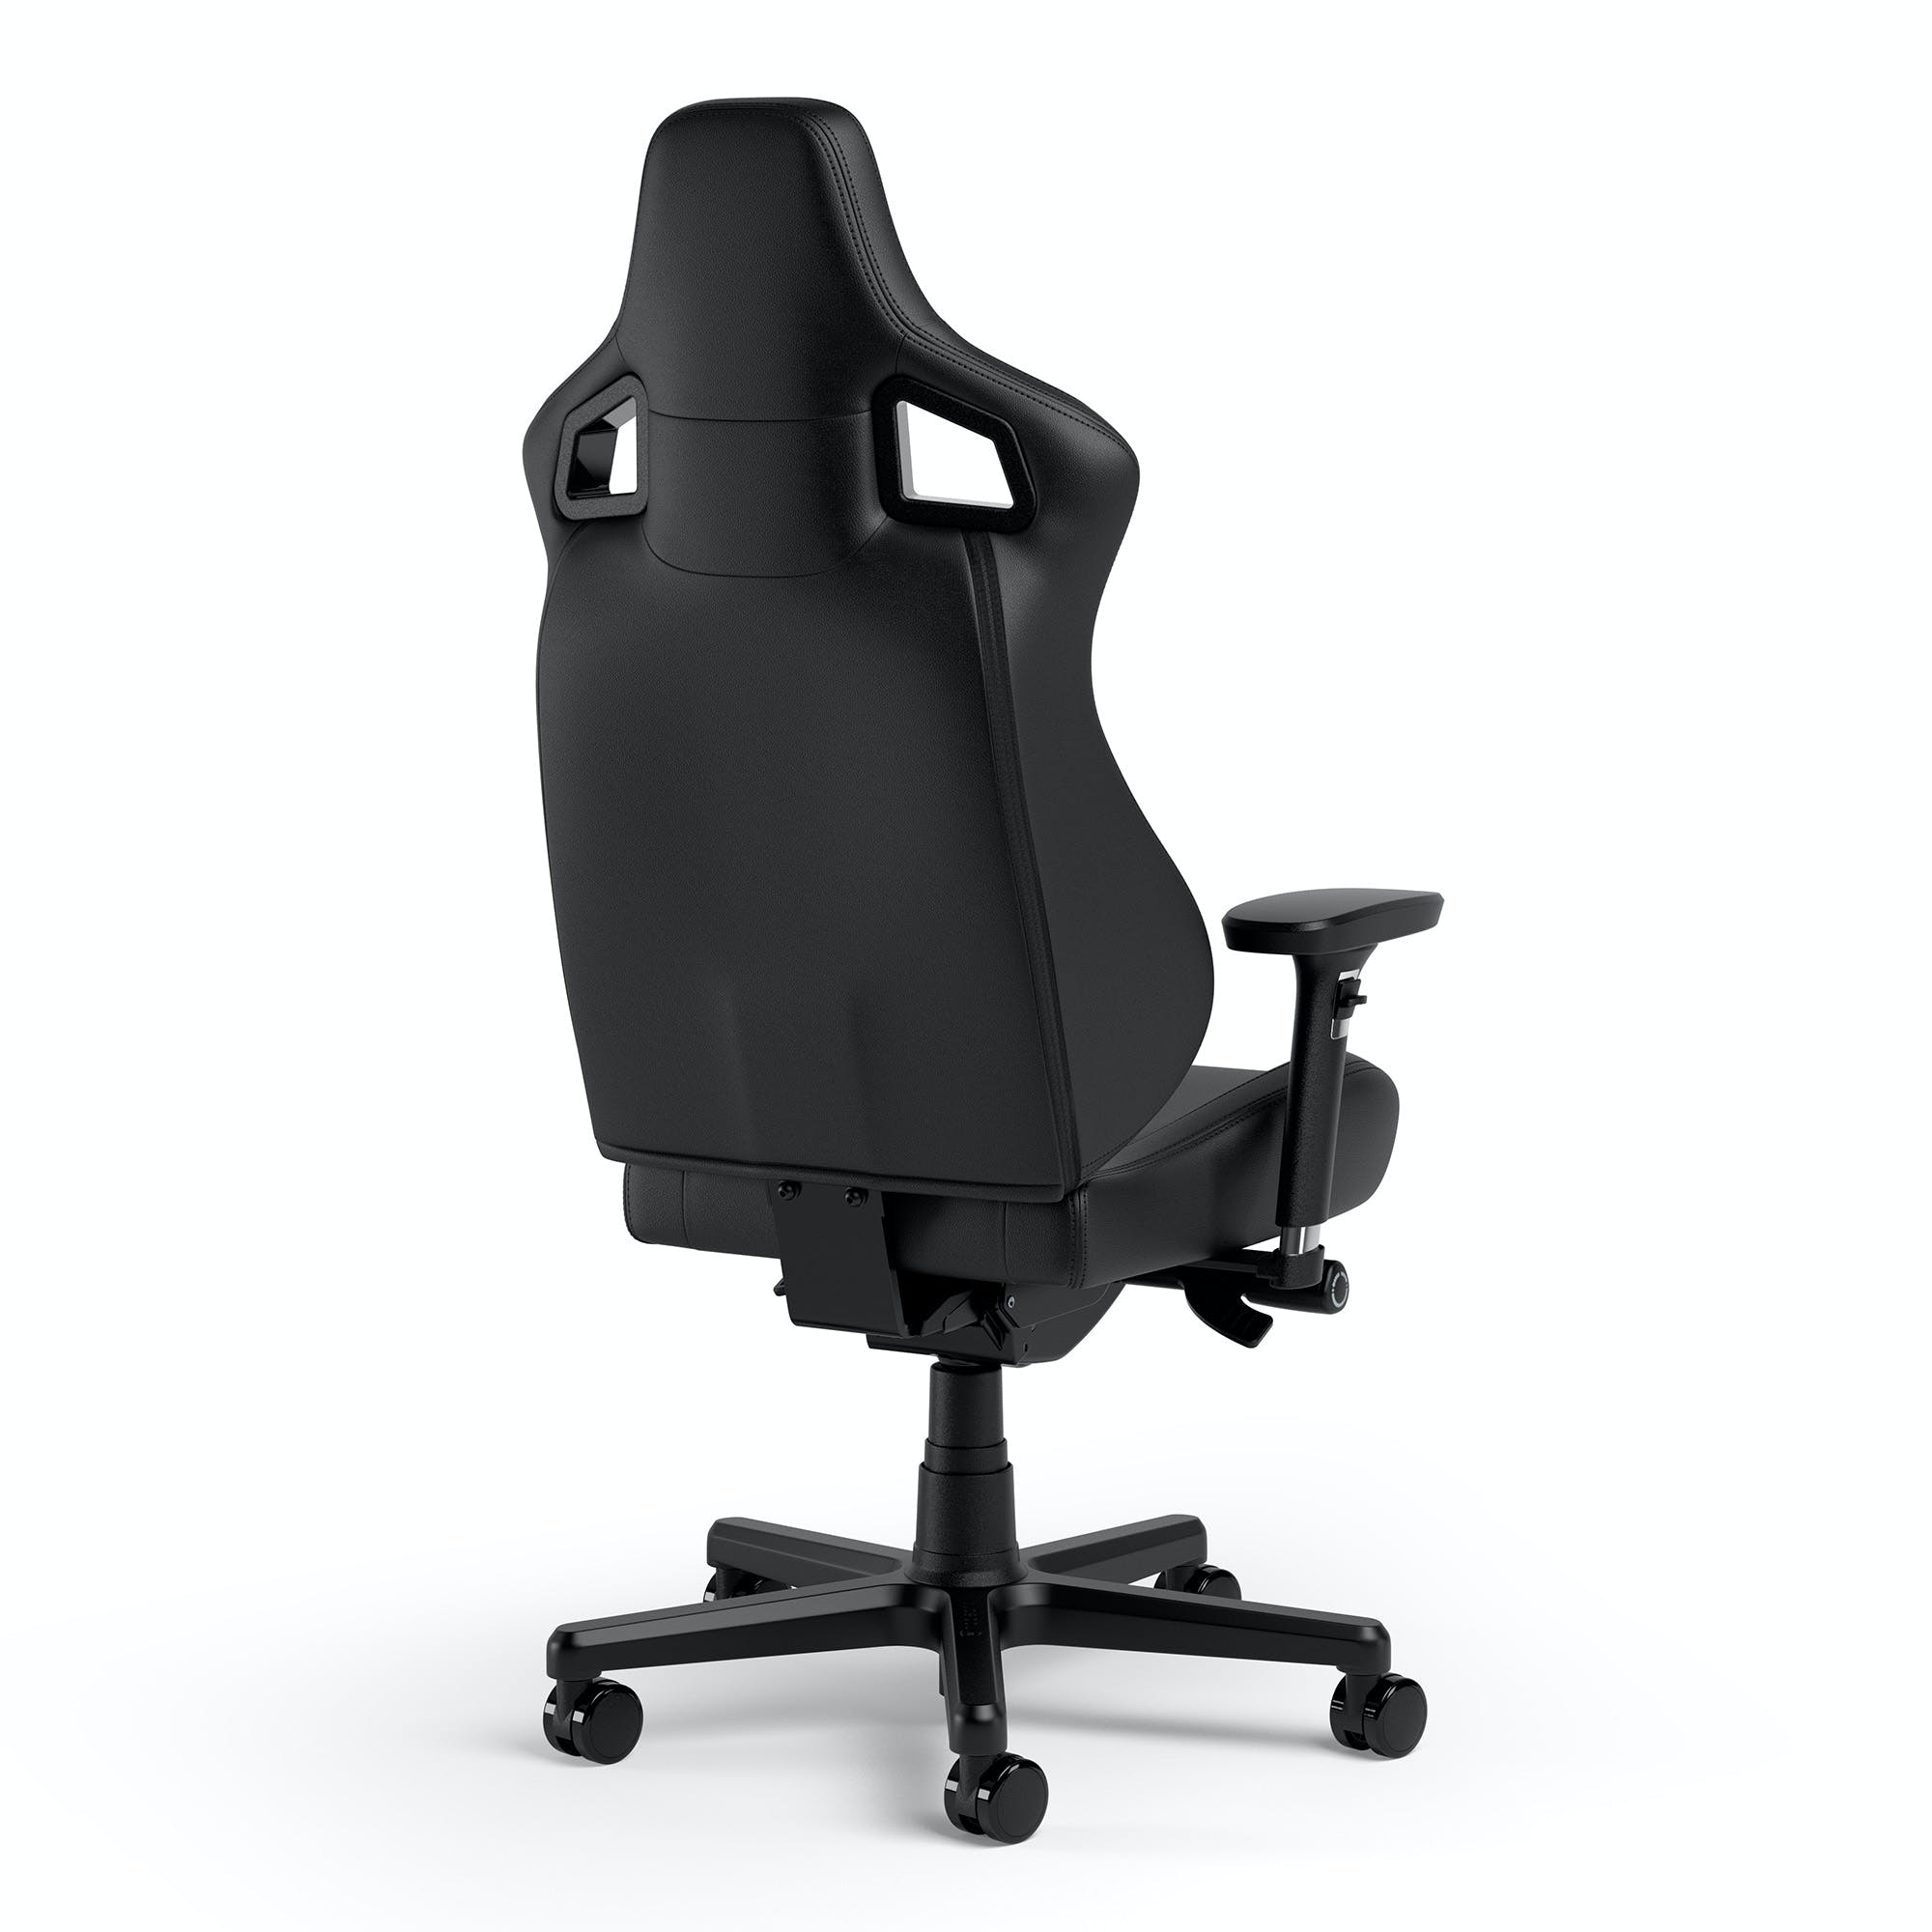 noblechairs - noblechairs EPIC Compact Gaming Chair - Carbon/Black